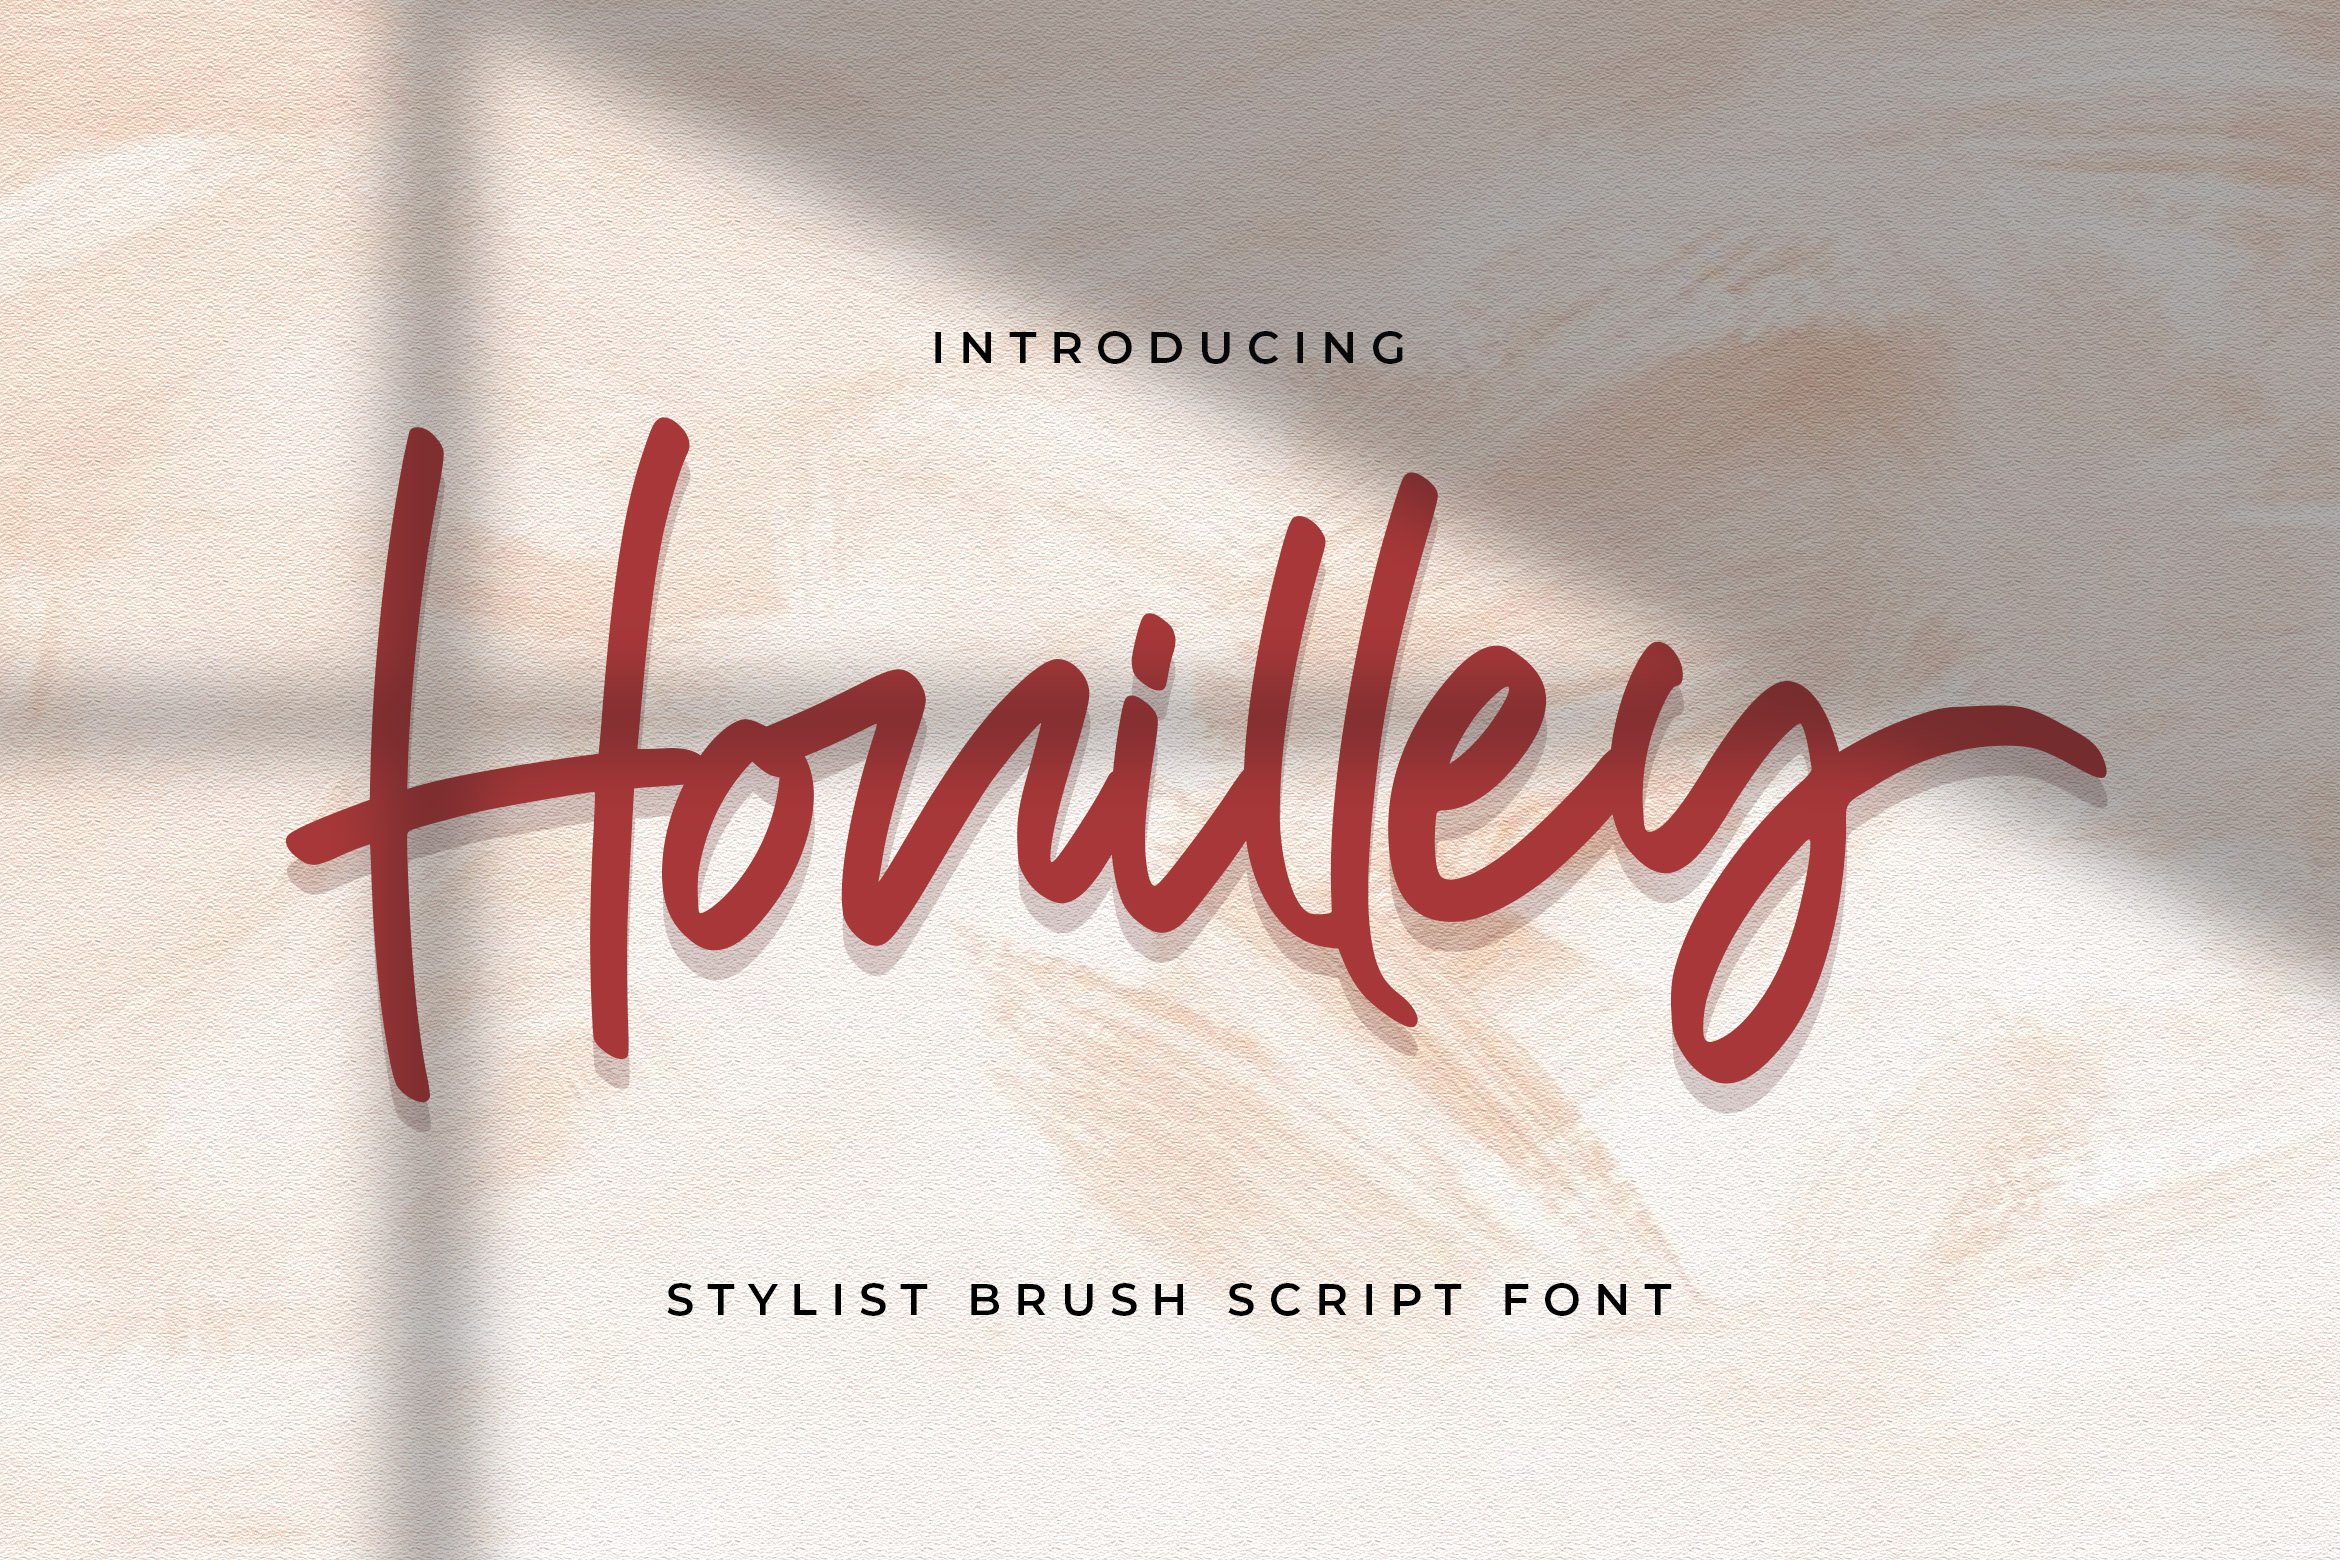 Honilley - Handwritten Font cover image.